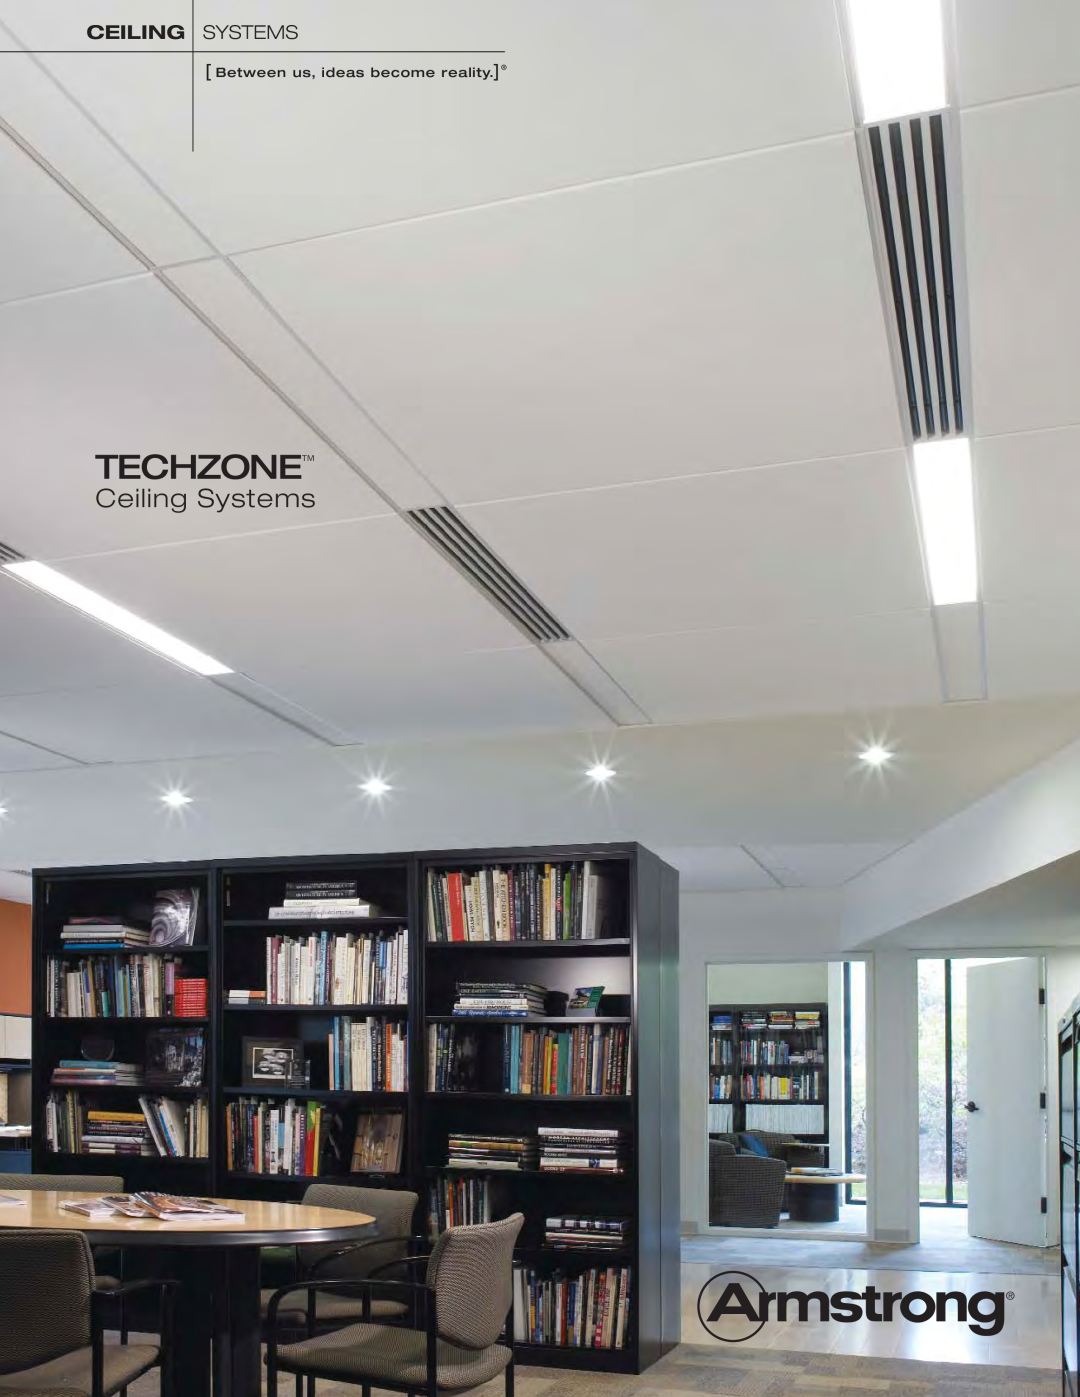 Armstrong World Industries TechZone manual Ceiling Systems, Techzone 